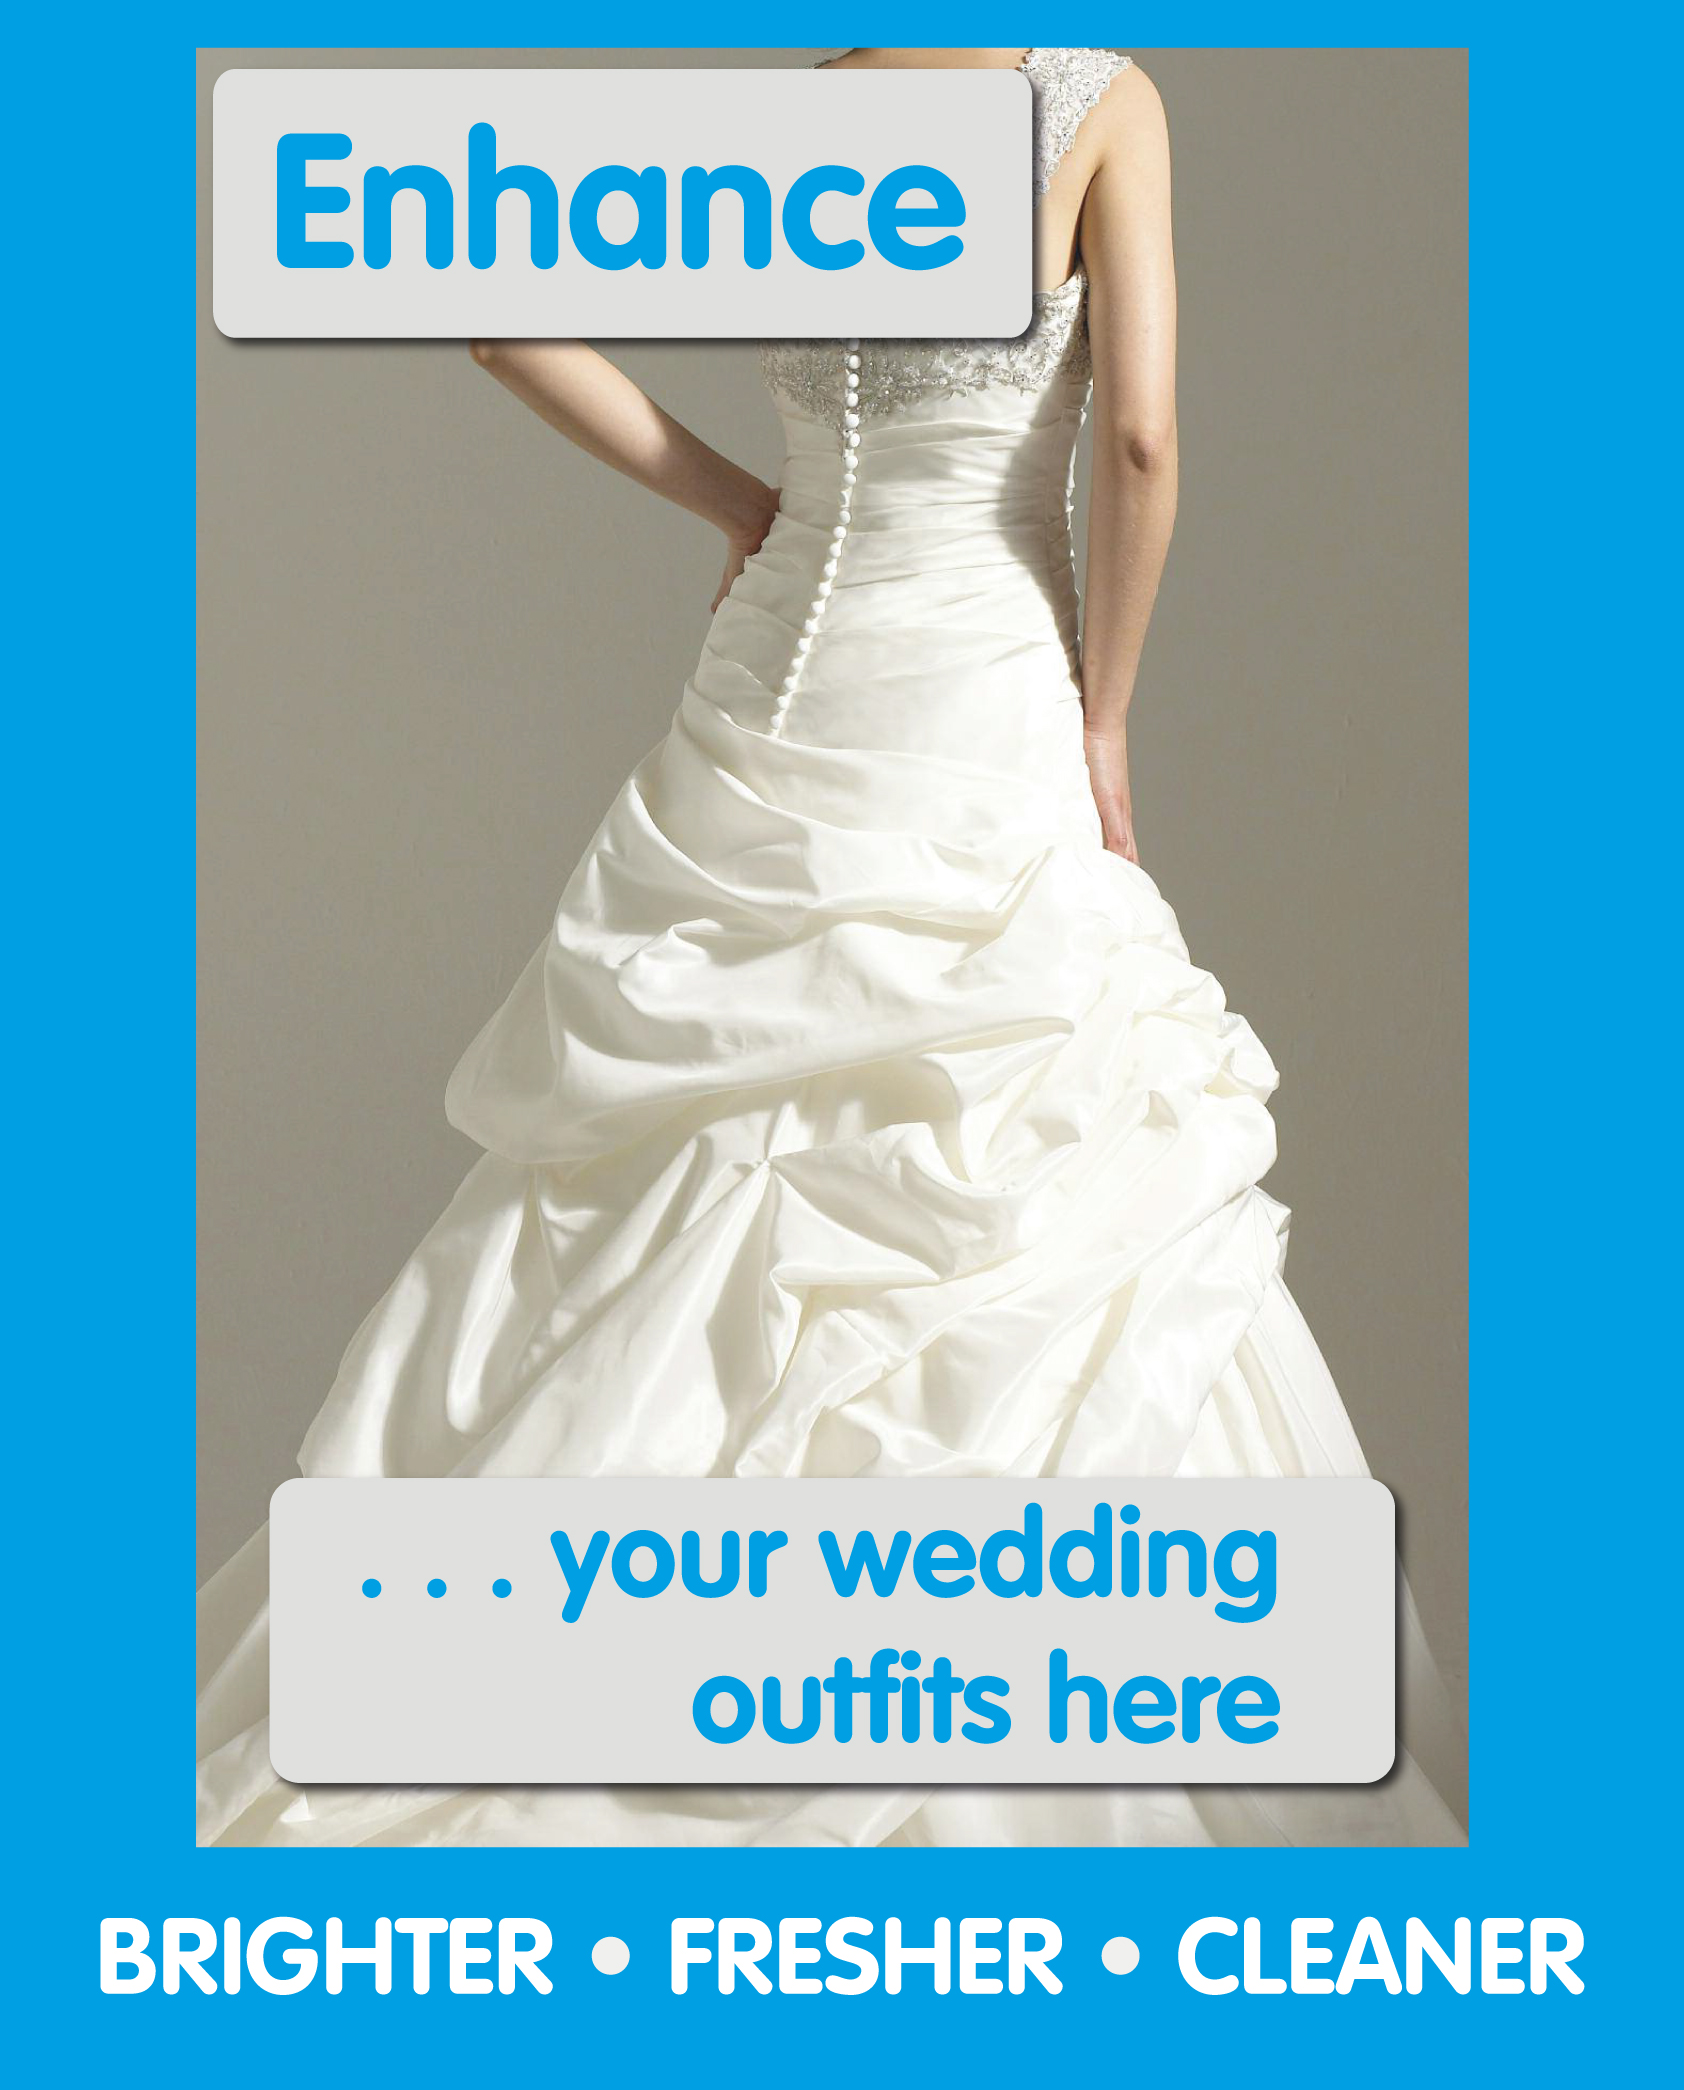 Enhance your wedding outfits here